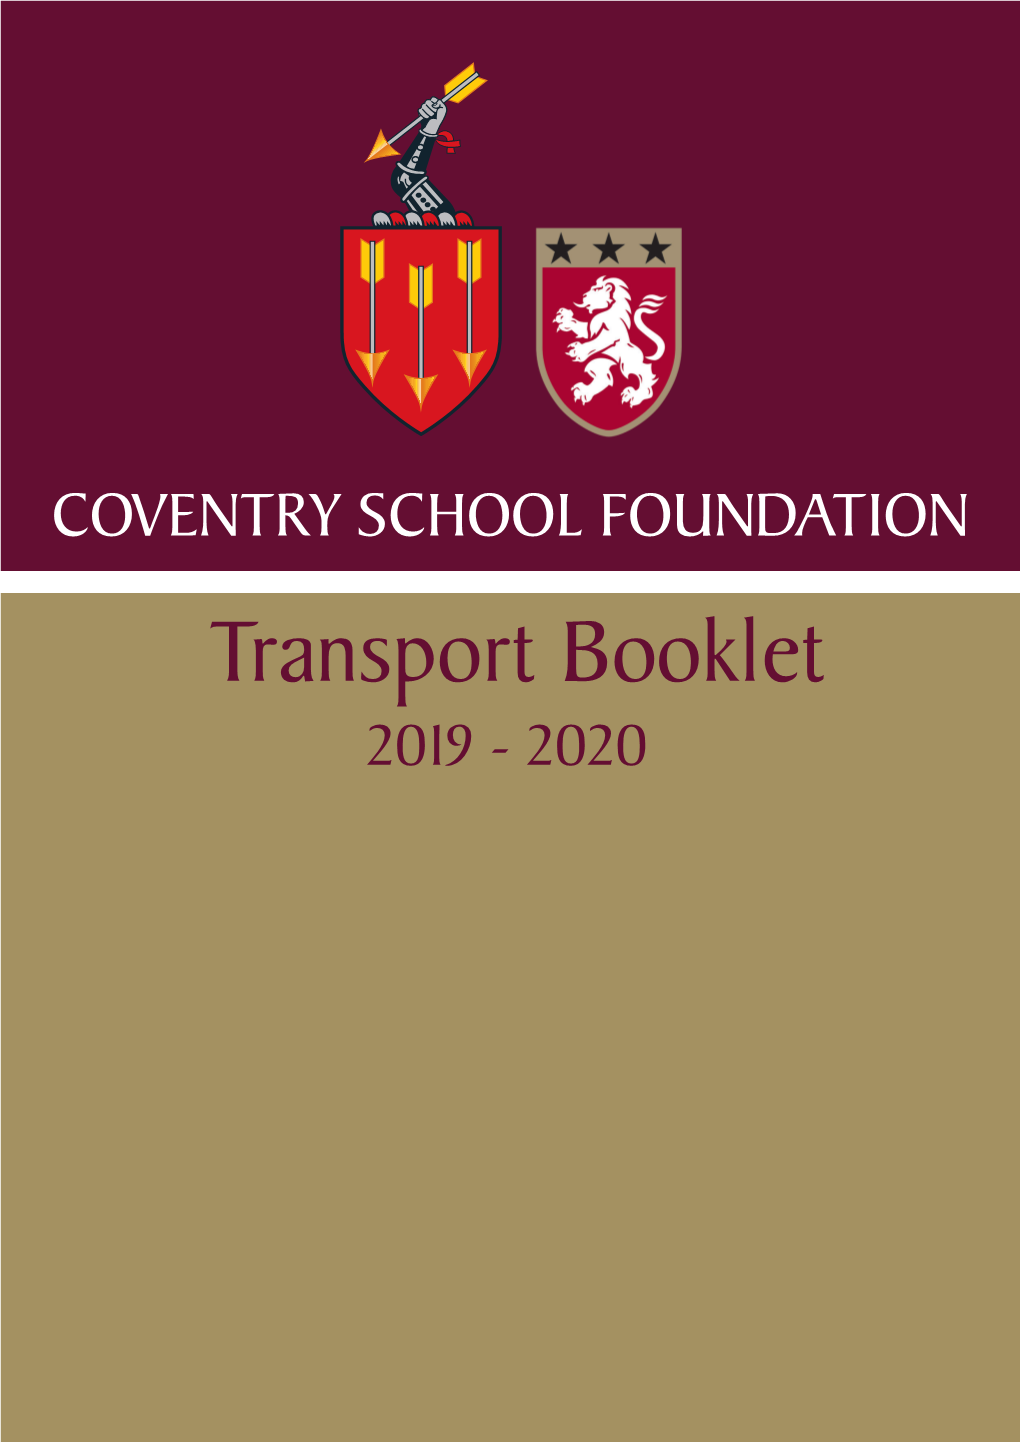 Transport Booklet 2019 - 2020 COVENTRY SCHOOL FOUNDATION - TRANSPORT ROUTES